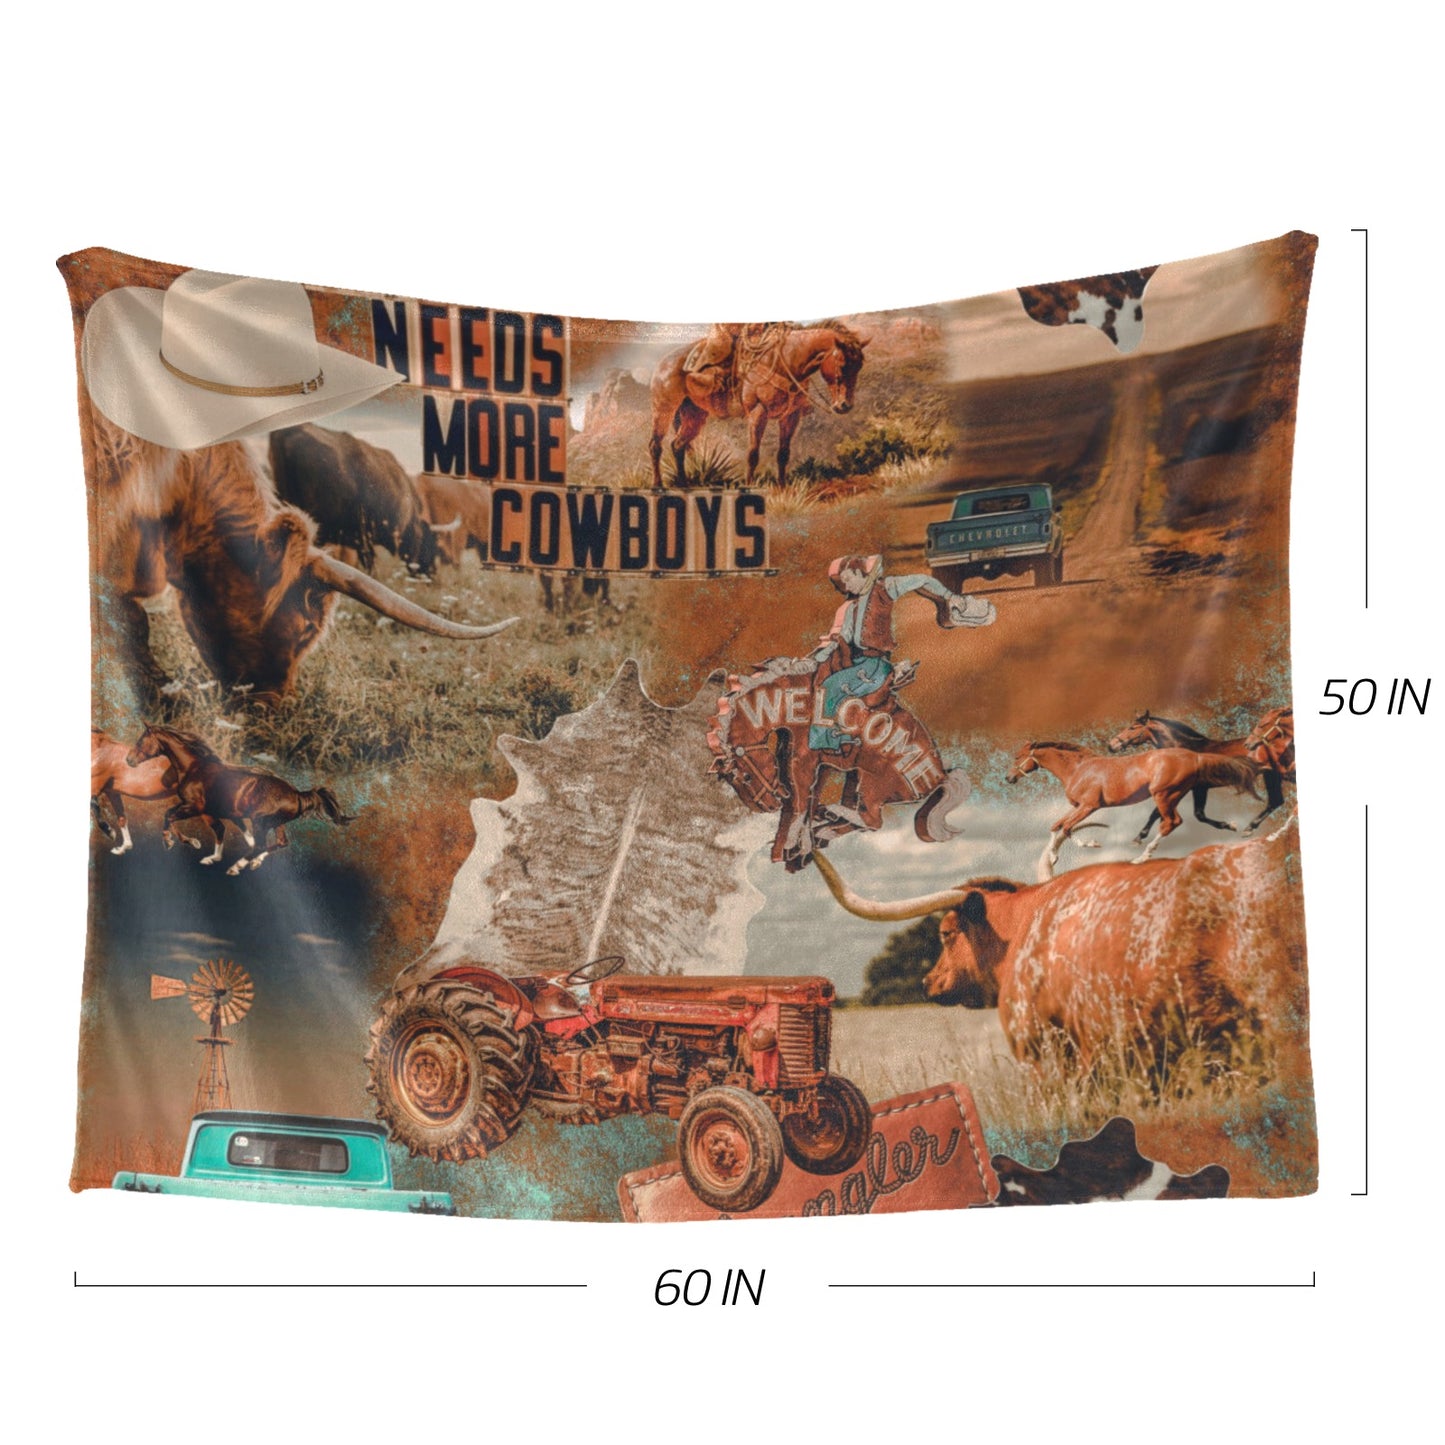 More Cowboys Collage 50" x 60" Blanket Throw